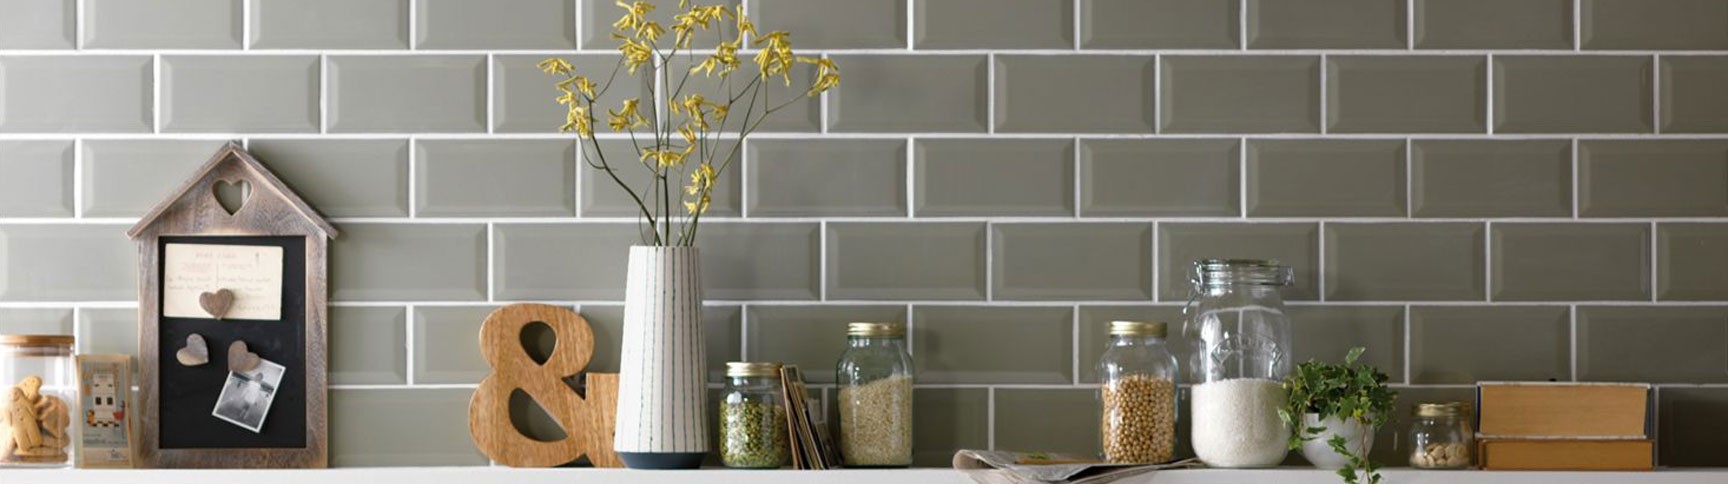 Wall Tiles | Budget-Friendly Prices| Bathroom & Kitchen Tiles | World of Tiles